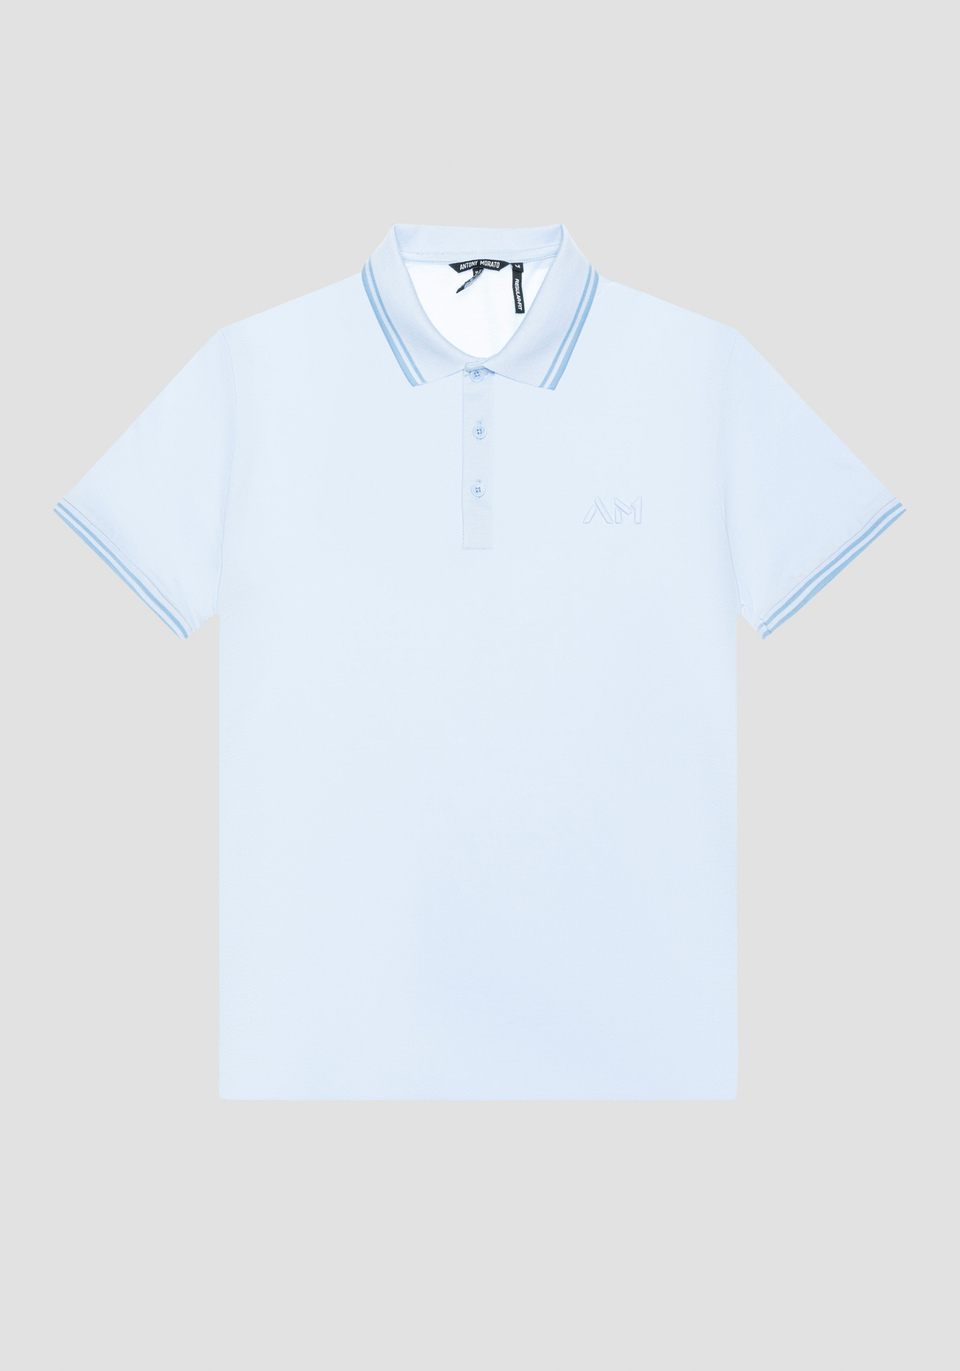 REGULAR FIT MERCERIZED COTTON PIQUE POLO SHIRT WITH LOGO EMBROIDERY - Antony Morato Online Shop